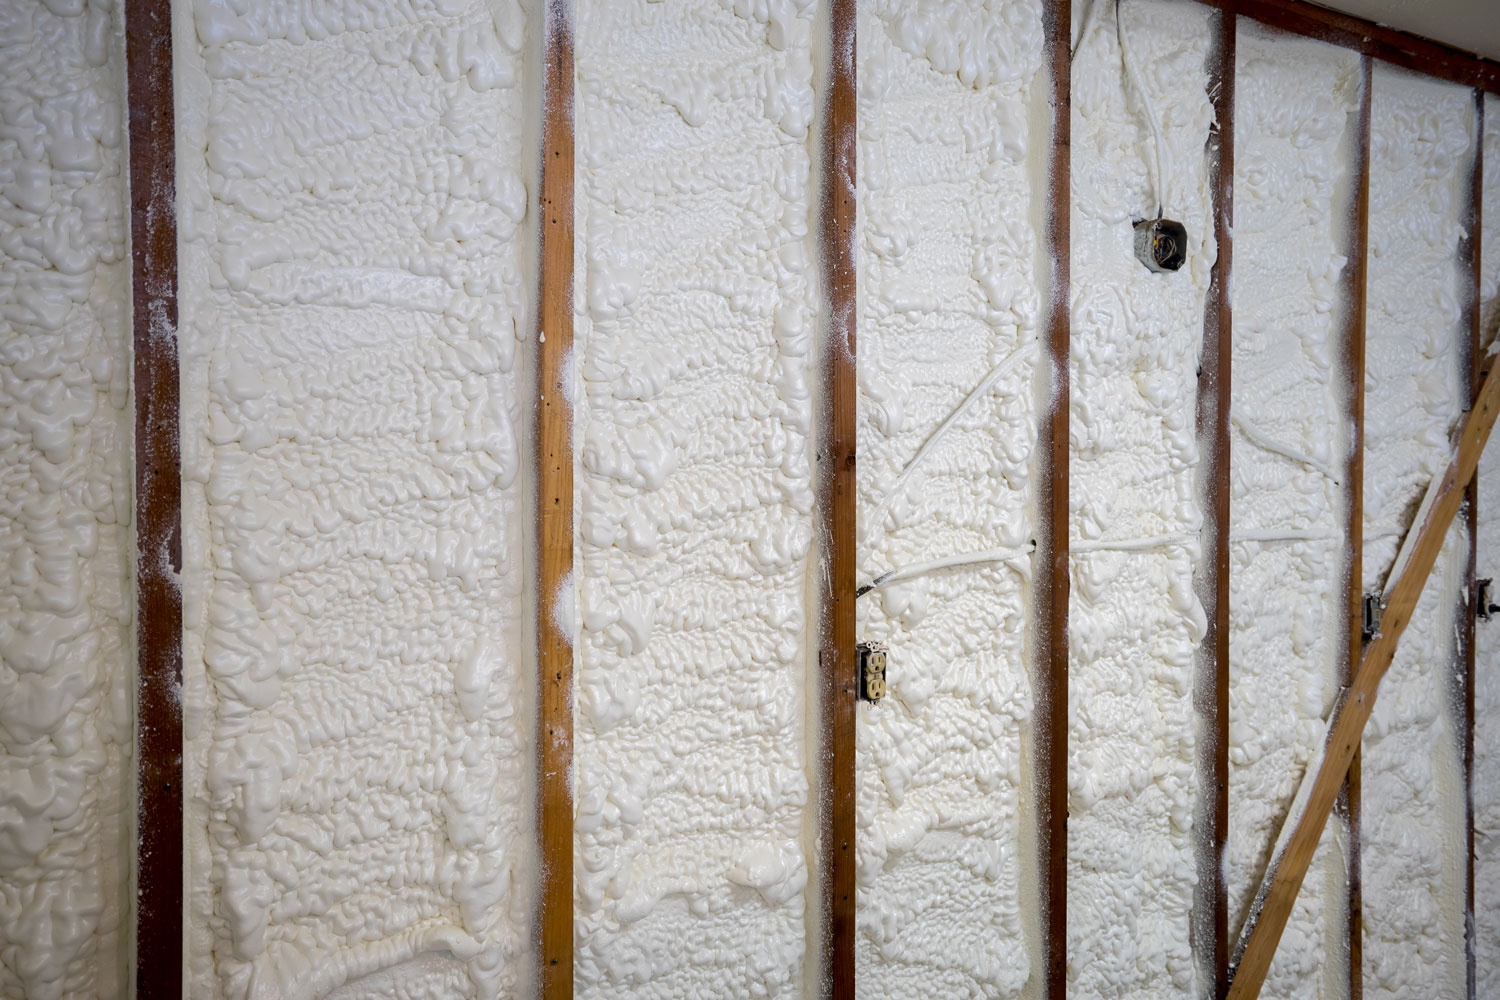 Spray foam insulation between the wooden framing of the house